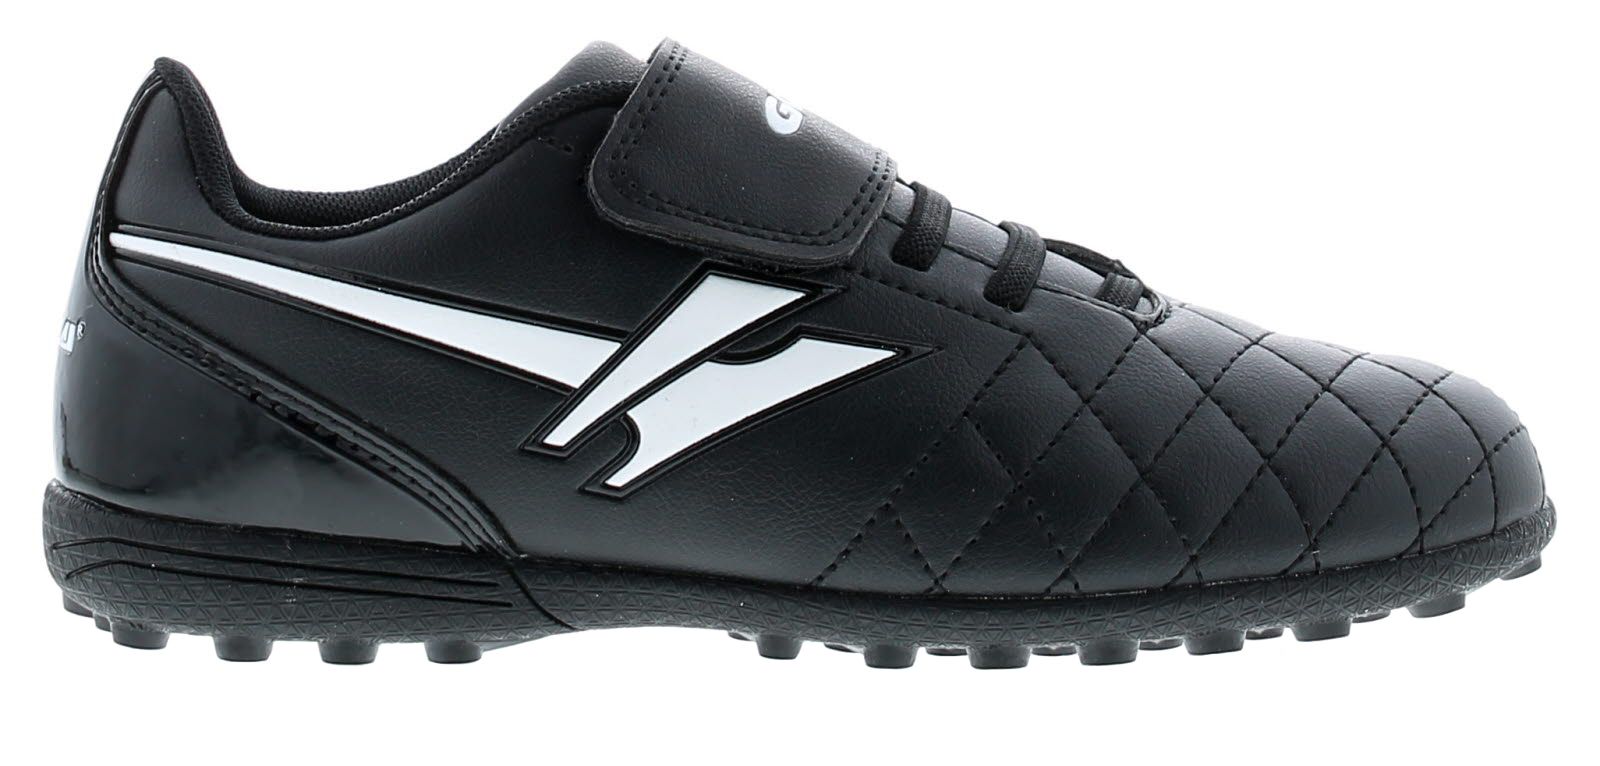 Gola Rey Vx Vel Younger Boys Football Trainers & Astro-Turf Boots 7 - 1. Manmade Upper. Manmade Lining. Synthetic Sole. Gola Rey Vx Vel Lace Ups Velcro Football Boots Boys Childrens.